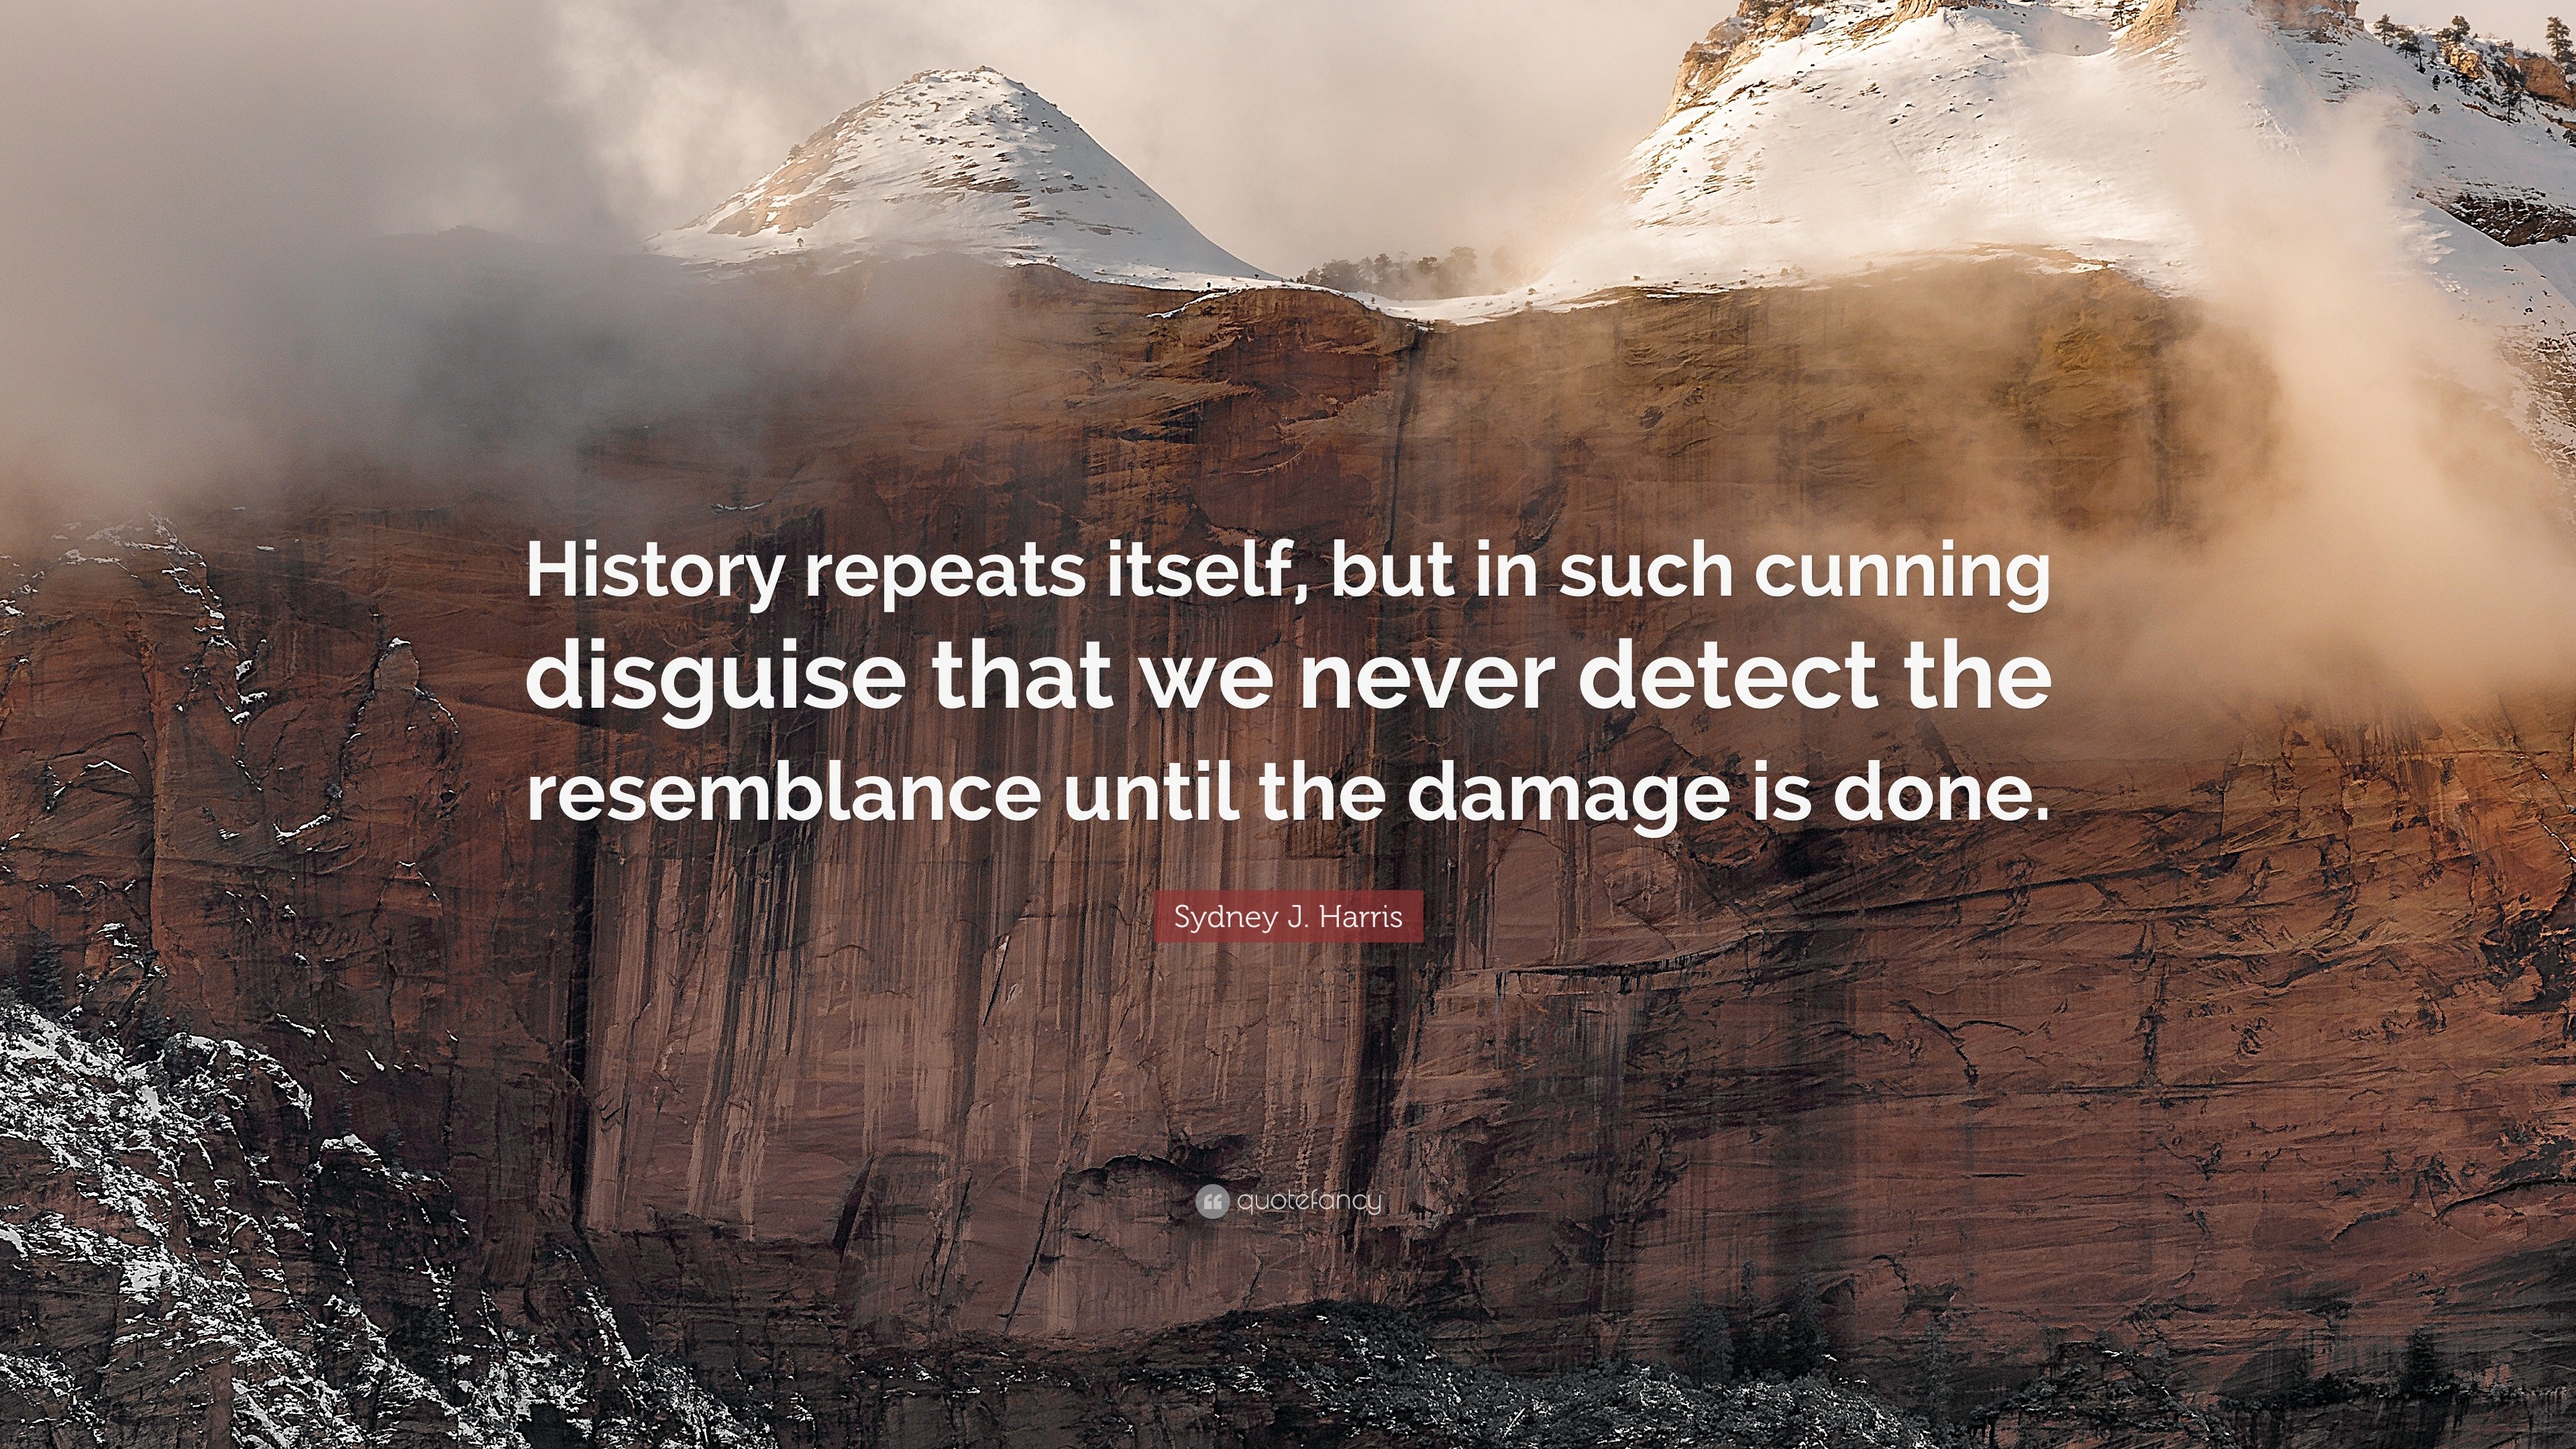 Sydney J. Harris Quote: “History repeats itself, but in such cunning  disguise that we never detect